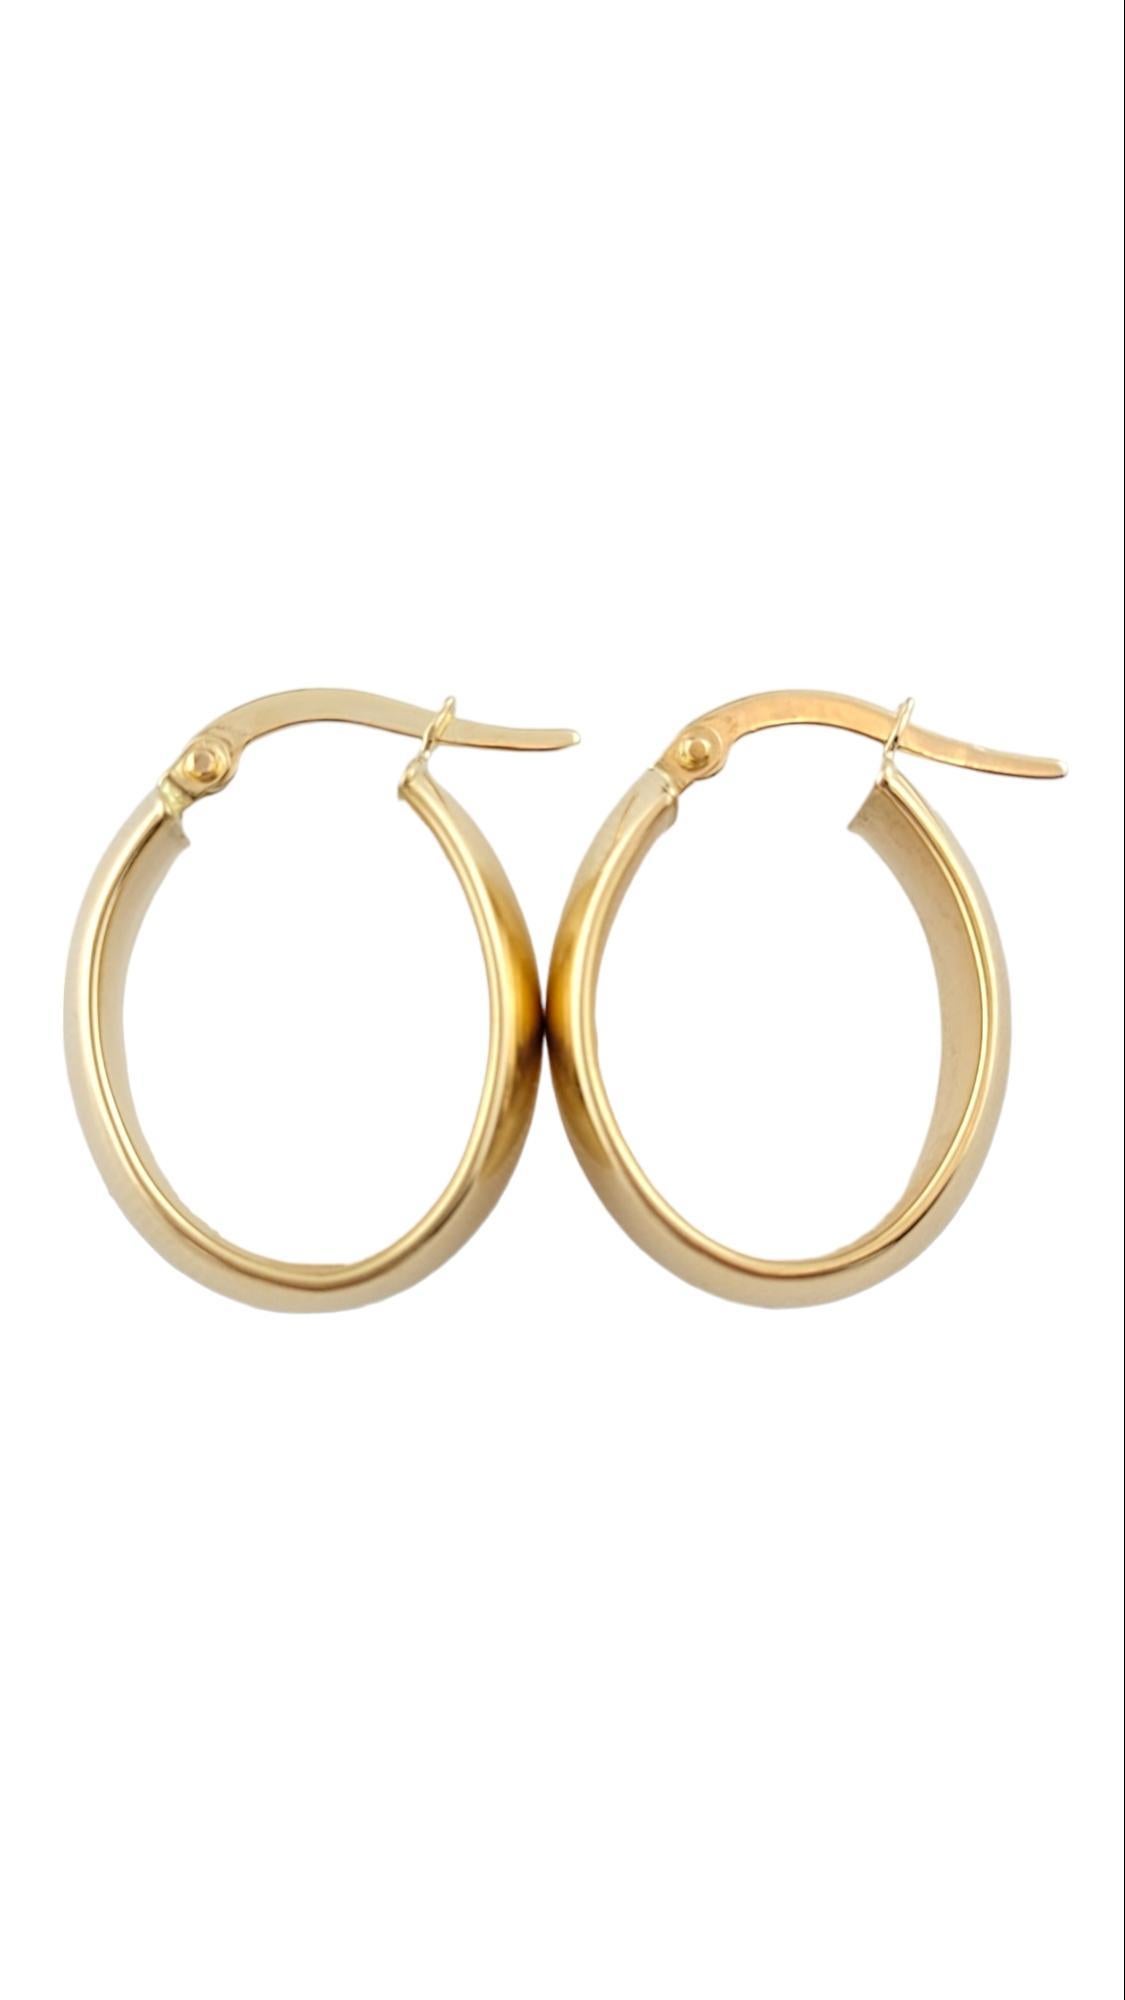 18K Yellow Gold Hoop Earrings

These gorgeous hoop earrings are crafted from 18K yellow gold!

Size: 22.97mm X 17.47mm X 7.84mm (.904